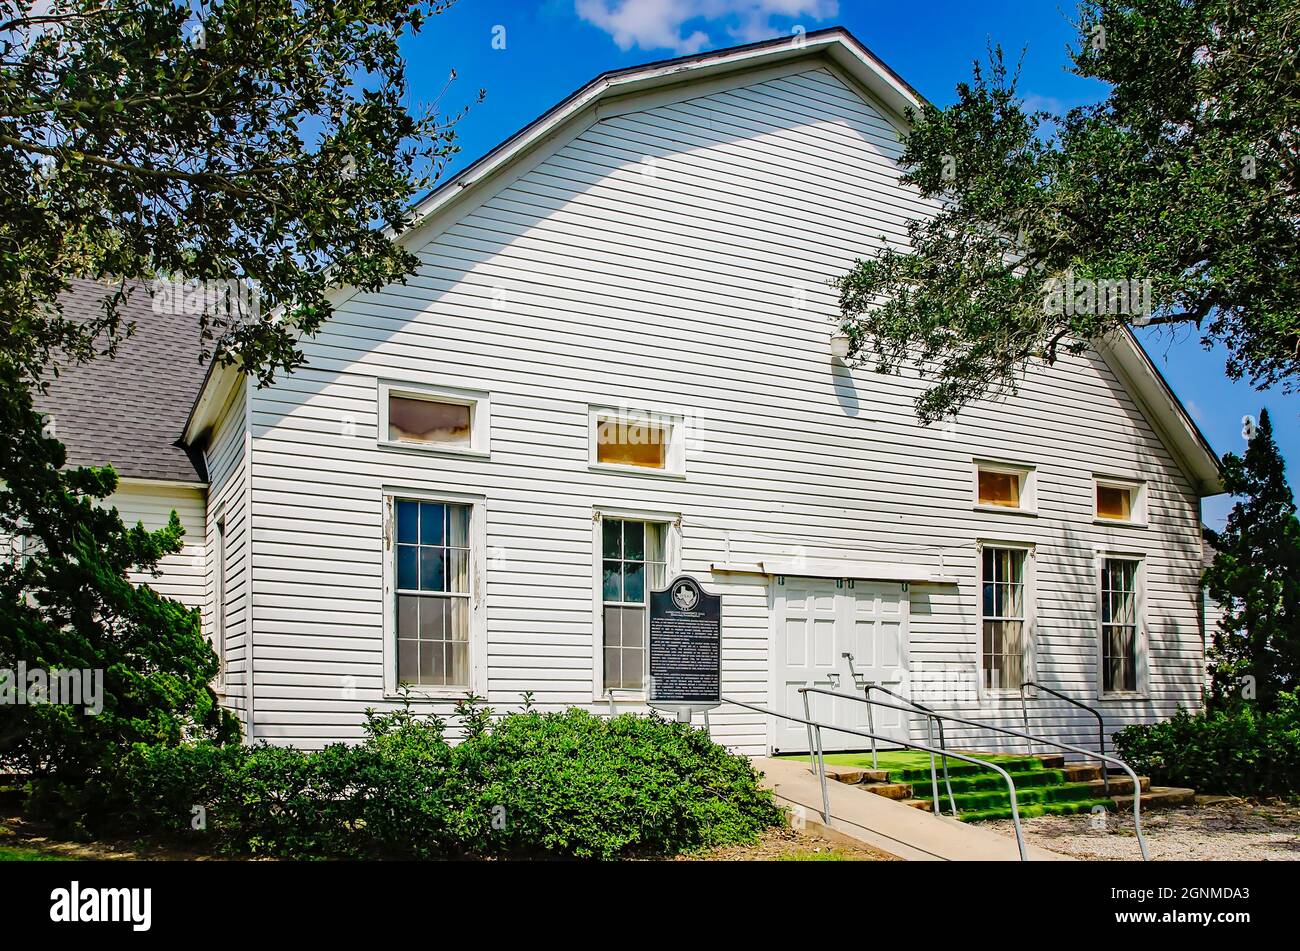 Danevang Community Hall (Danevang Forsamlingshus) is pictured, Sept. 3, 2017, in Danevang, Texas. The community hall was constructed in 1895. Stock Photo